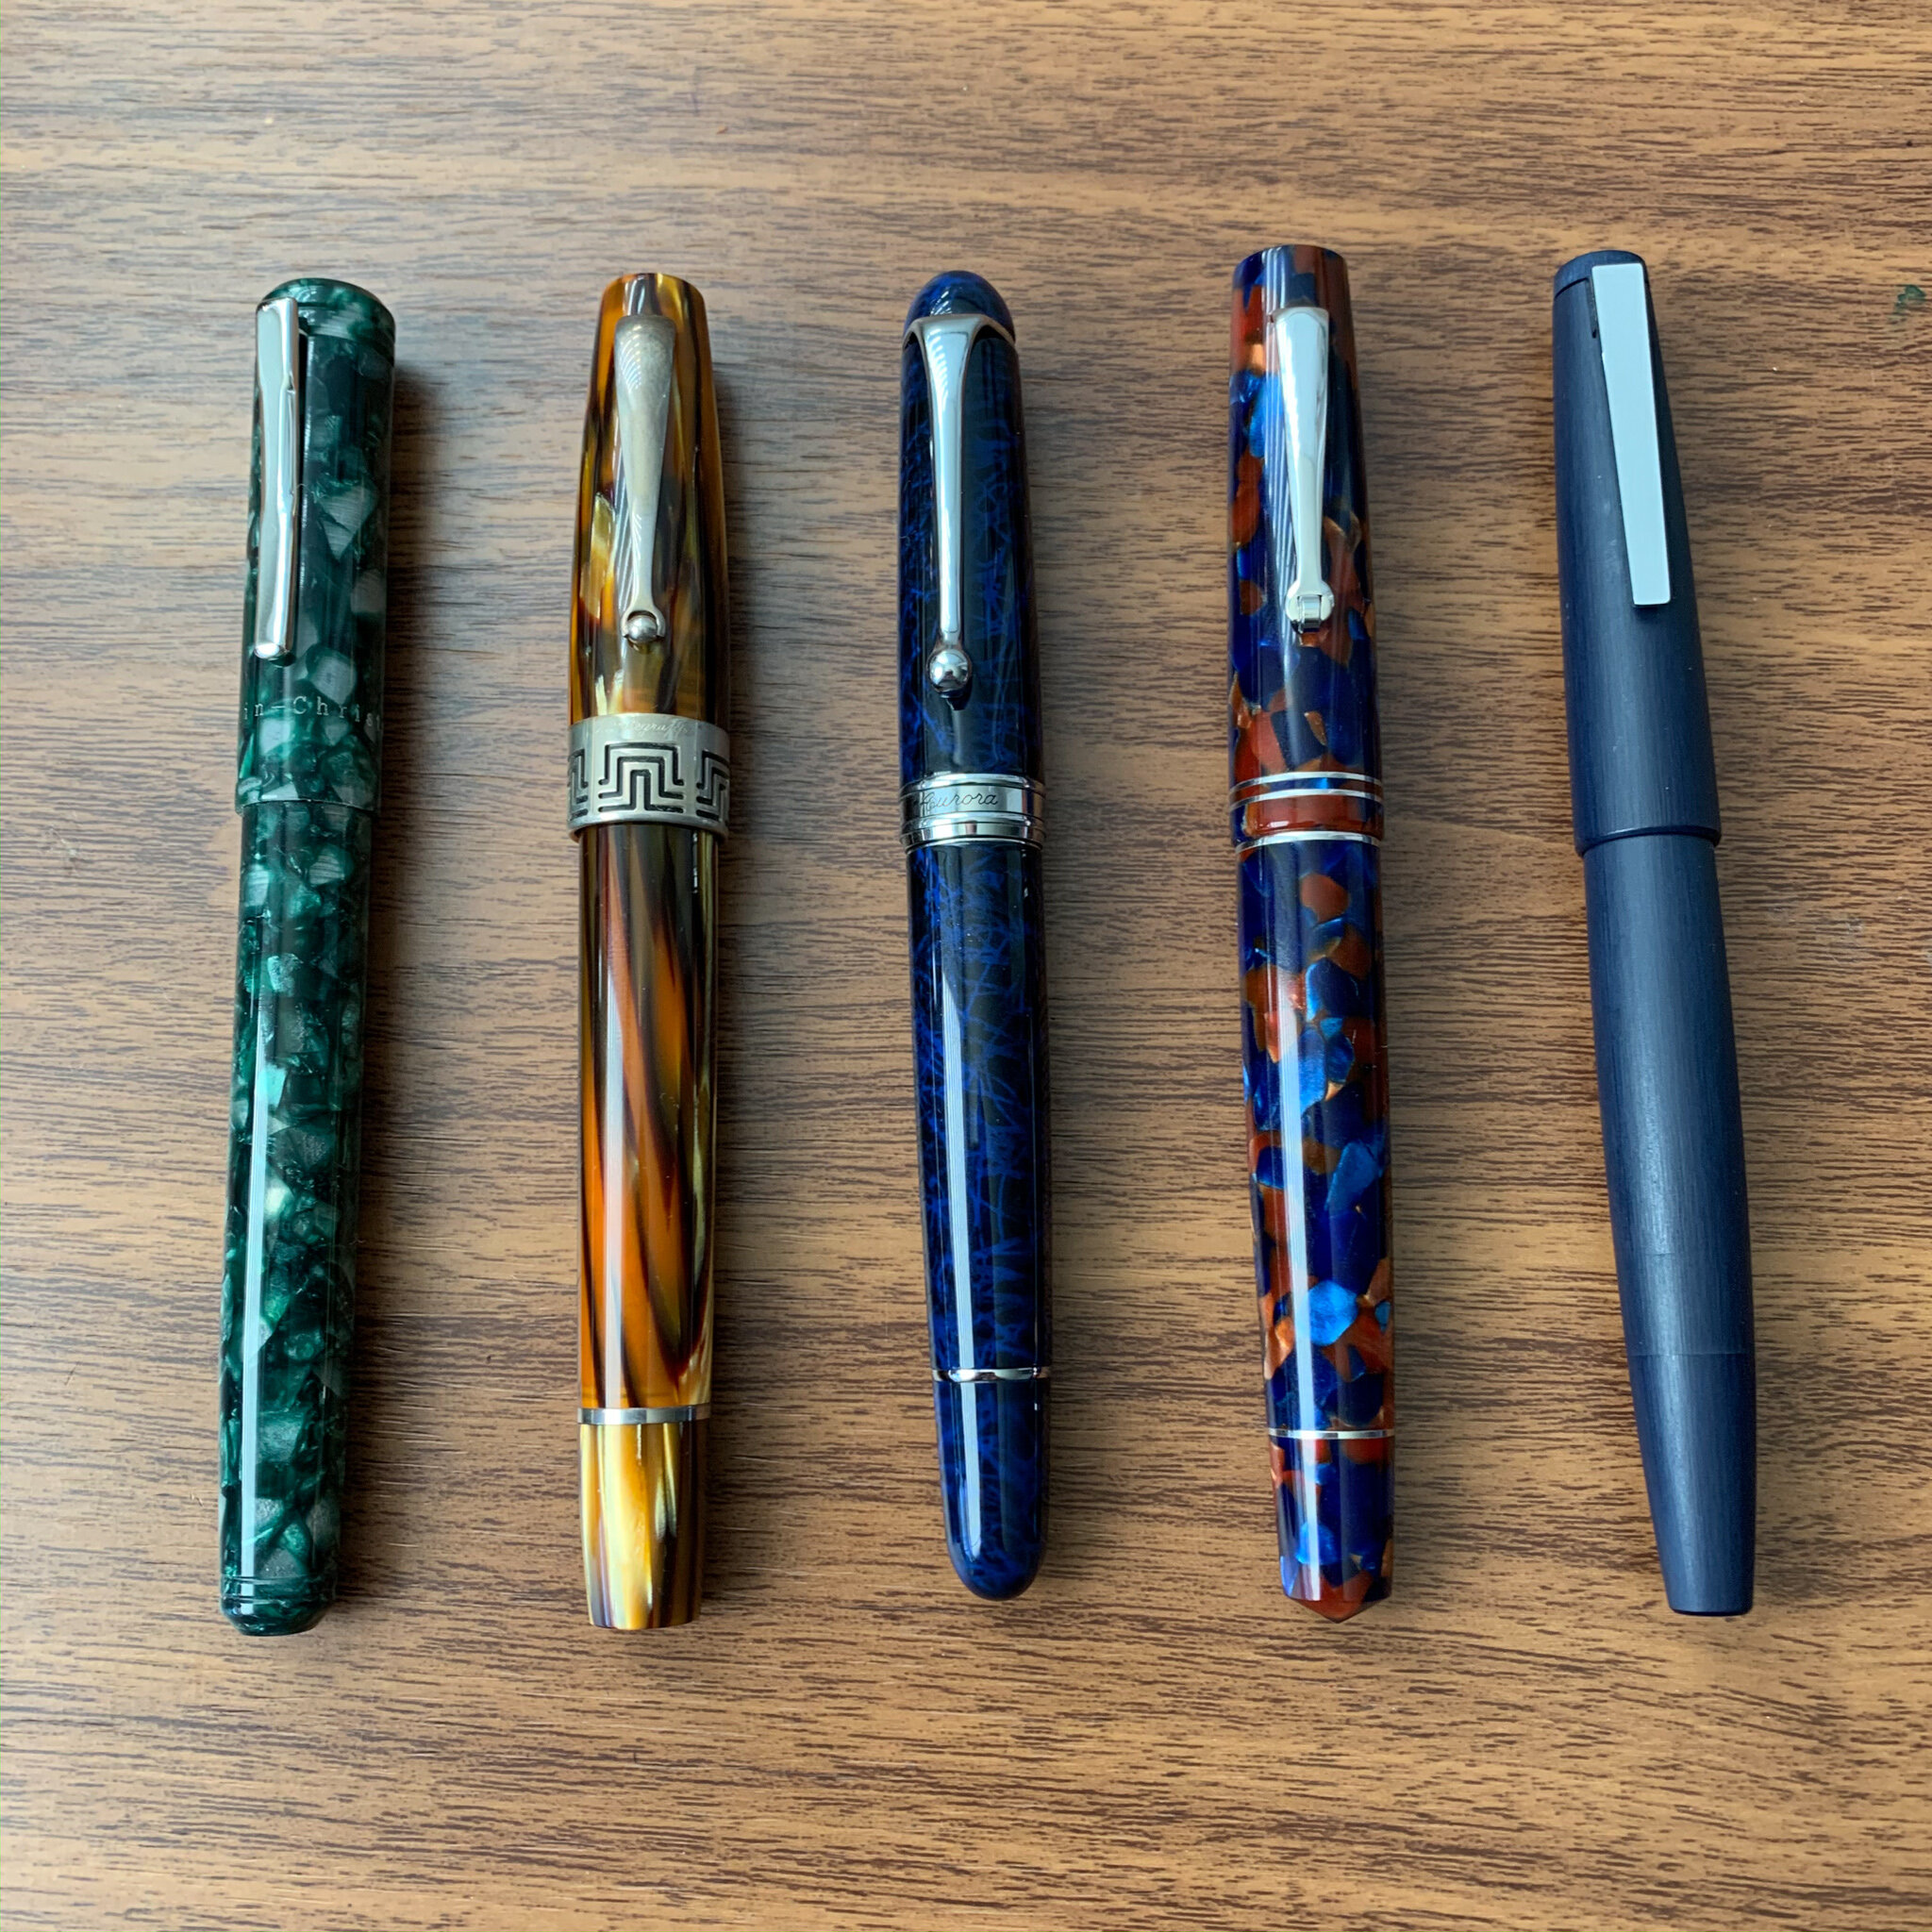 5 Reasons to Start Using Fountain Pens in 2019